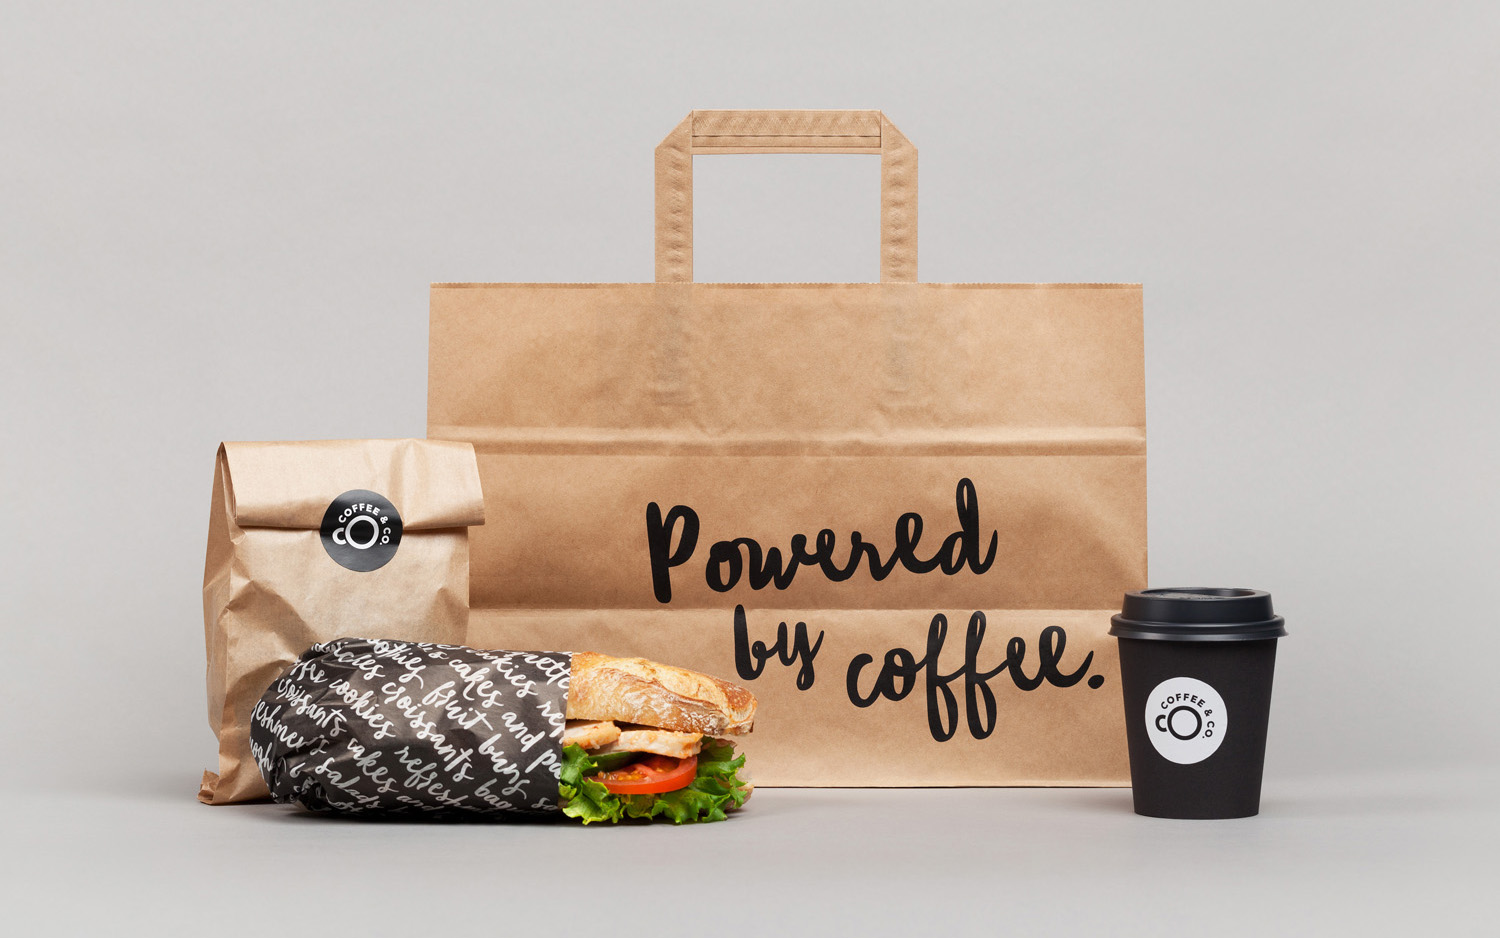 Logo and packaging by Bond for cruise ship cafeteria concept Coffee & Co.